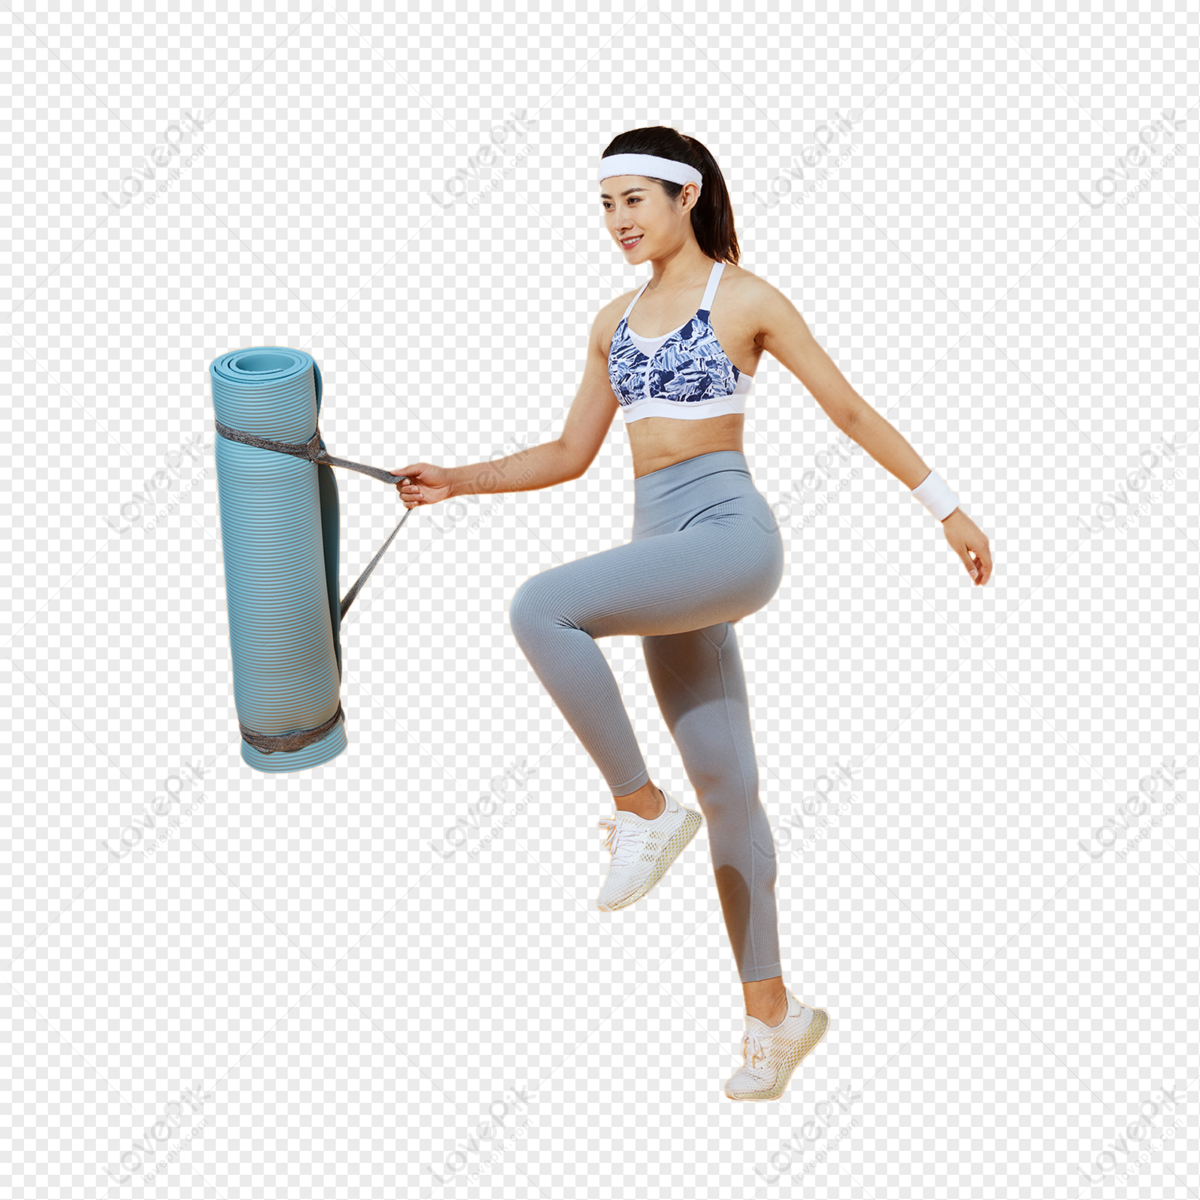 Female Holding Yoga Mat Image Show, Material, Plastic, Slim PNG Hd  Transparent Image And Clipart Image For Free Download - Lovepik